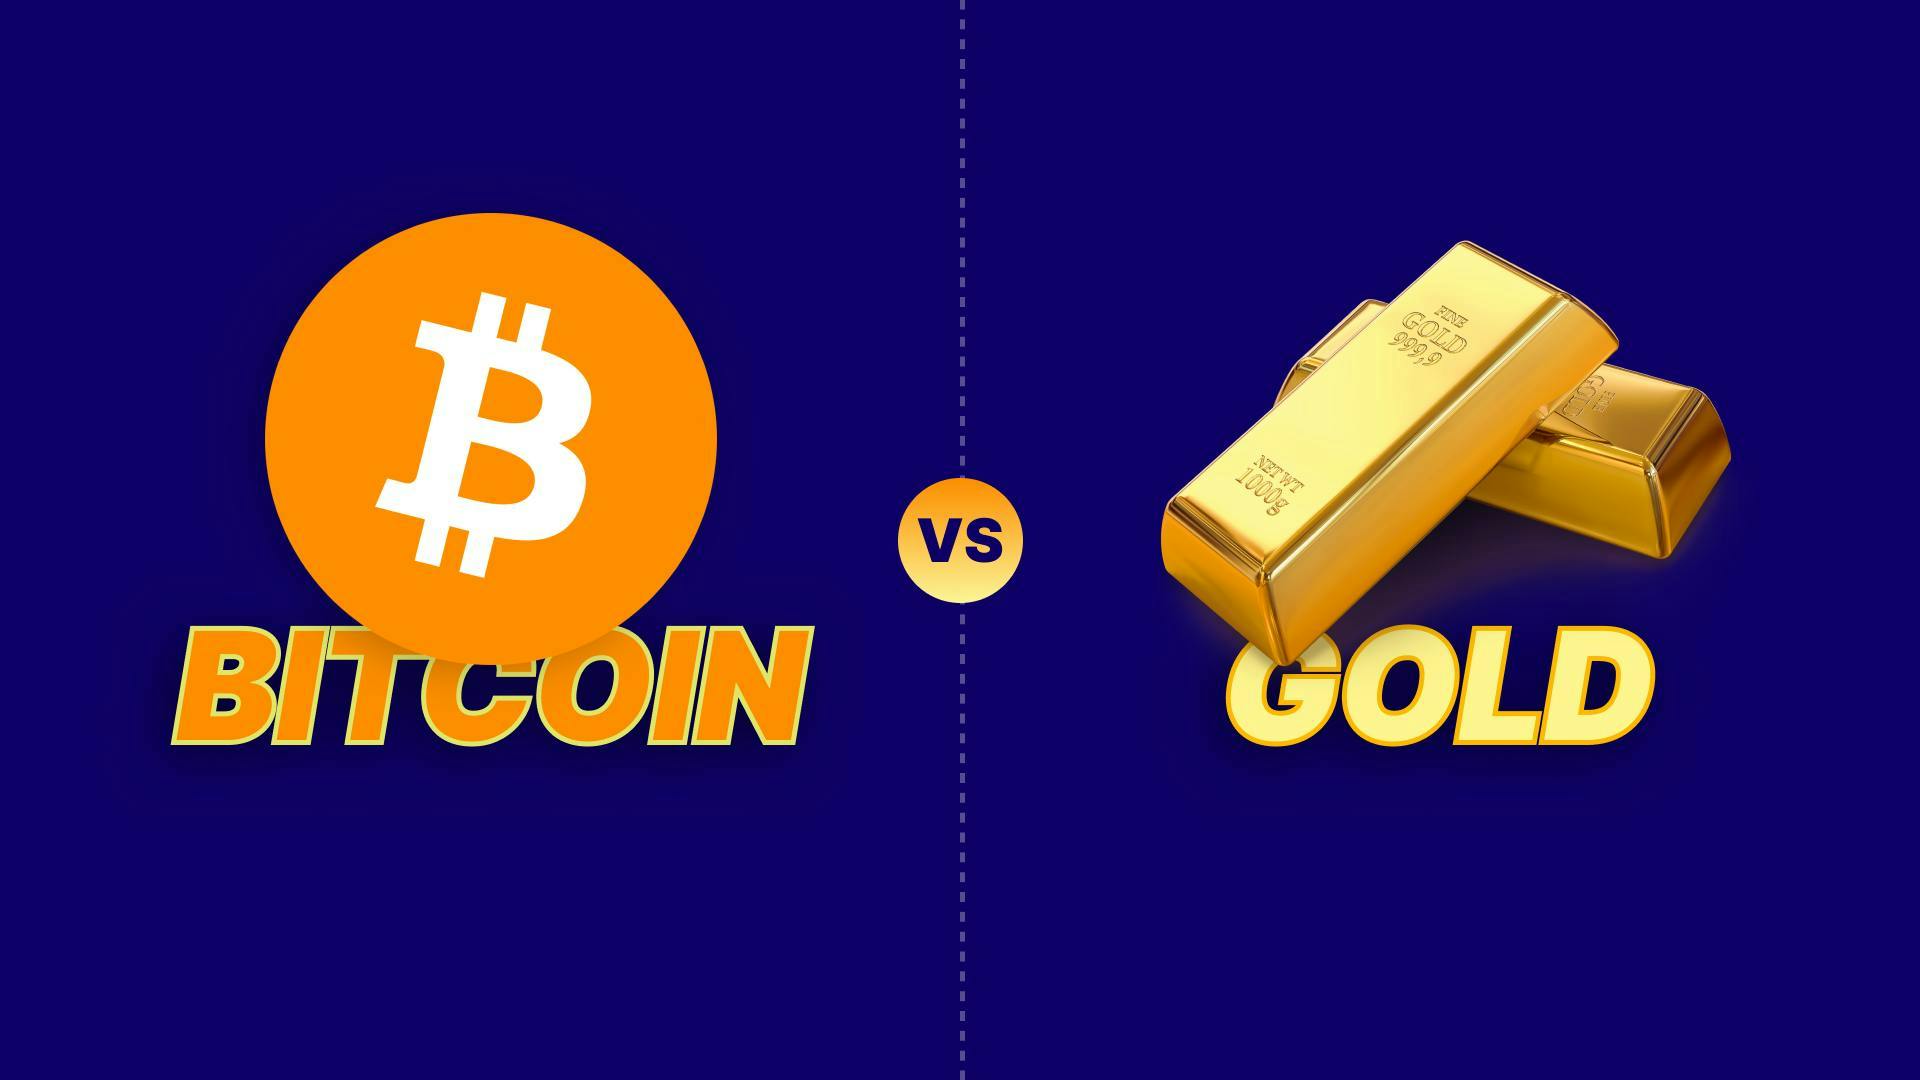 Bitcoin vs. Gold - Which Field Is Better To Have a Job In?